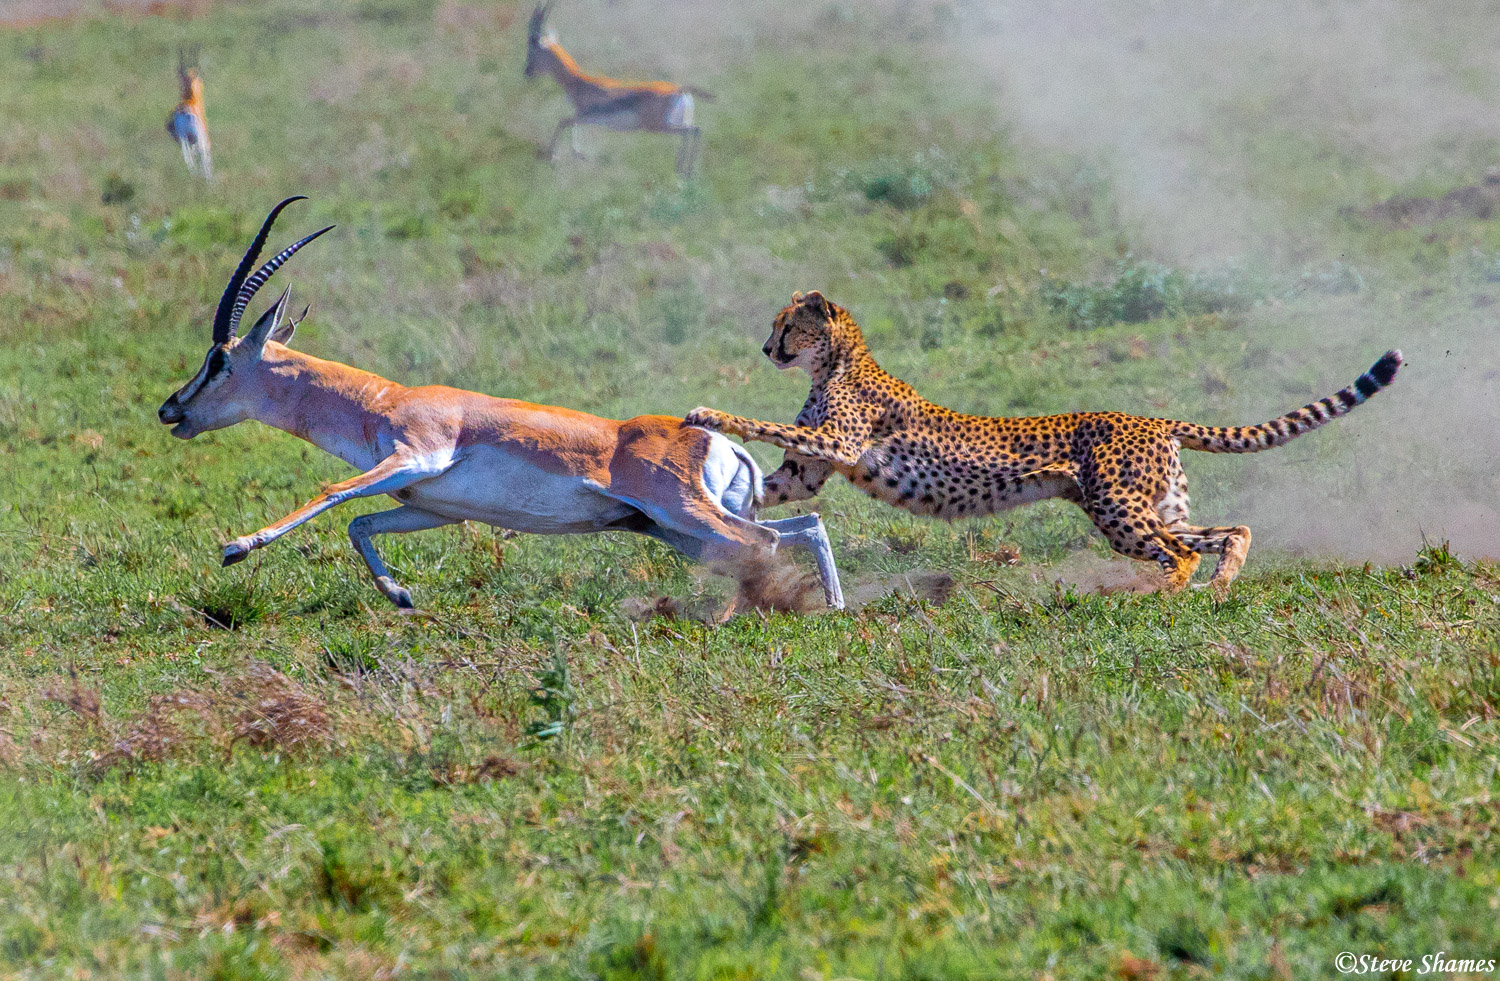 The mother cheetah catches up for a second time, and tries to bring down the gazelle.